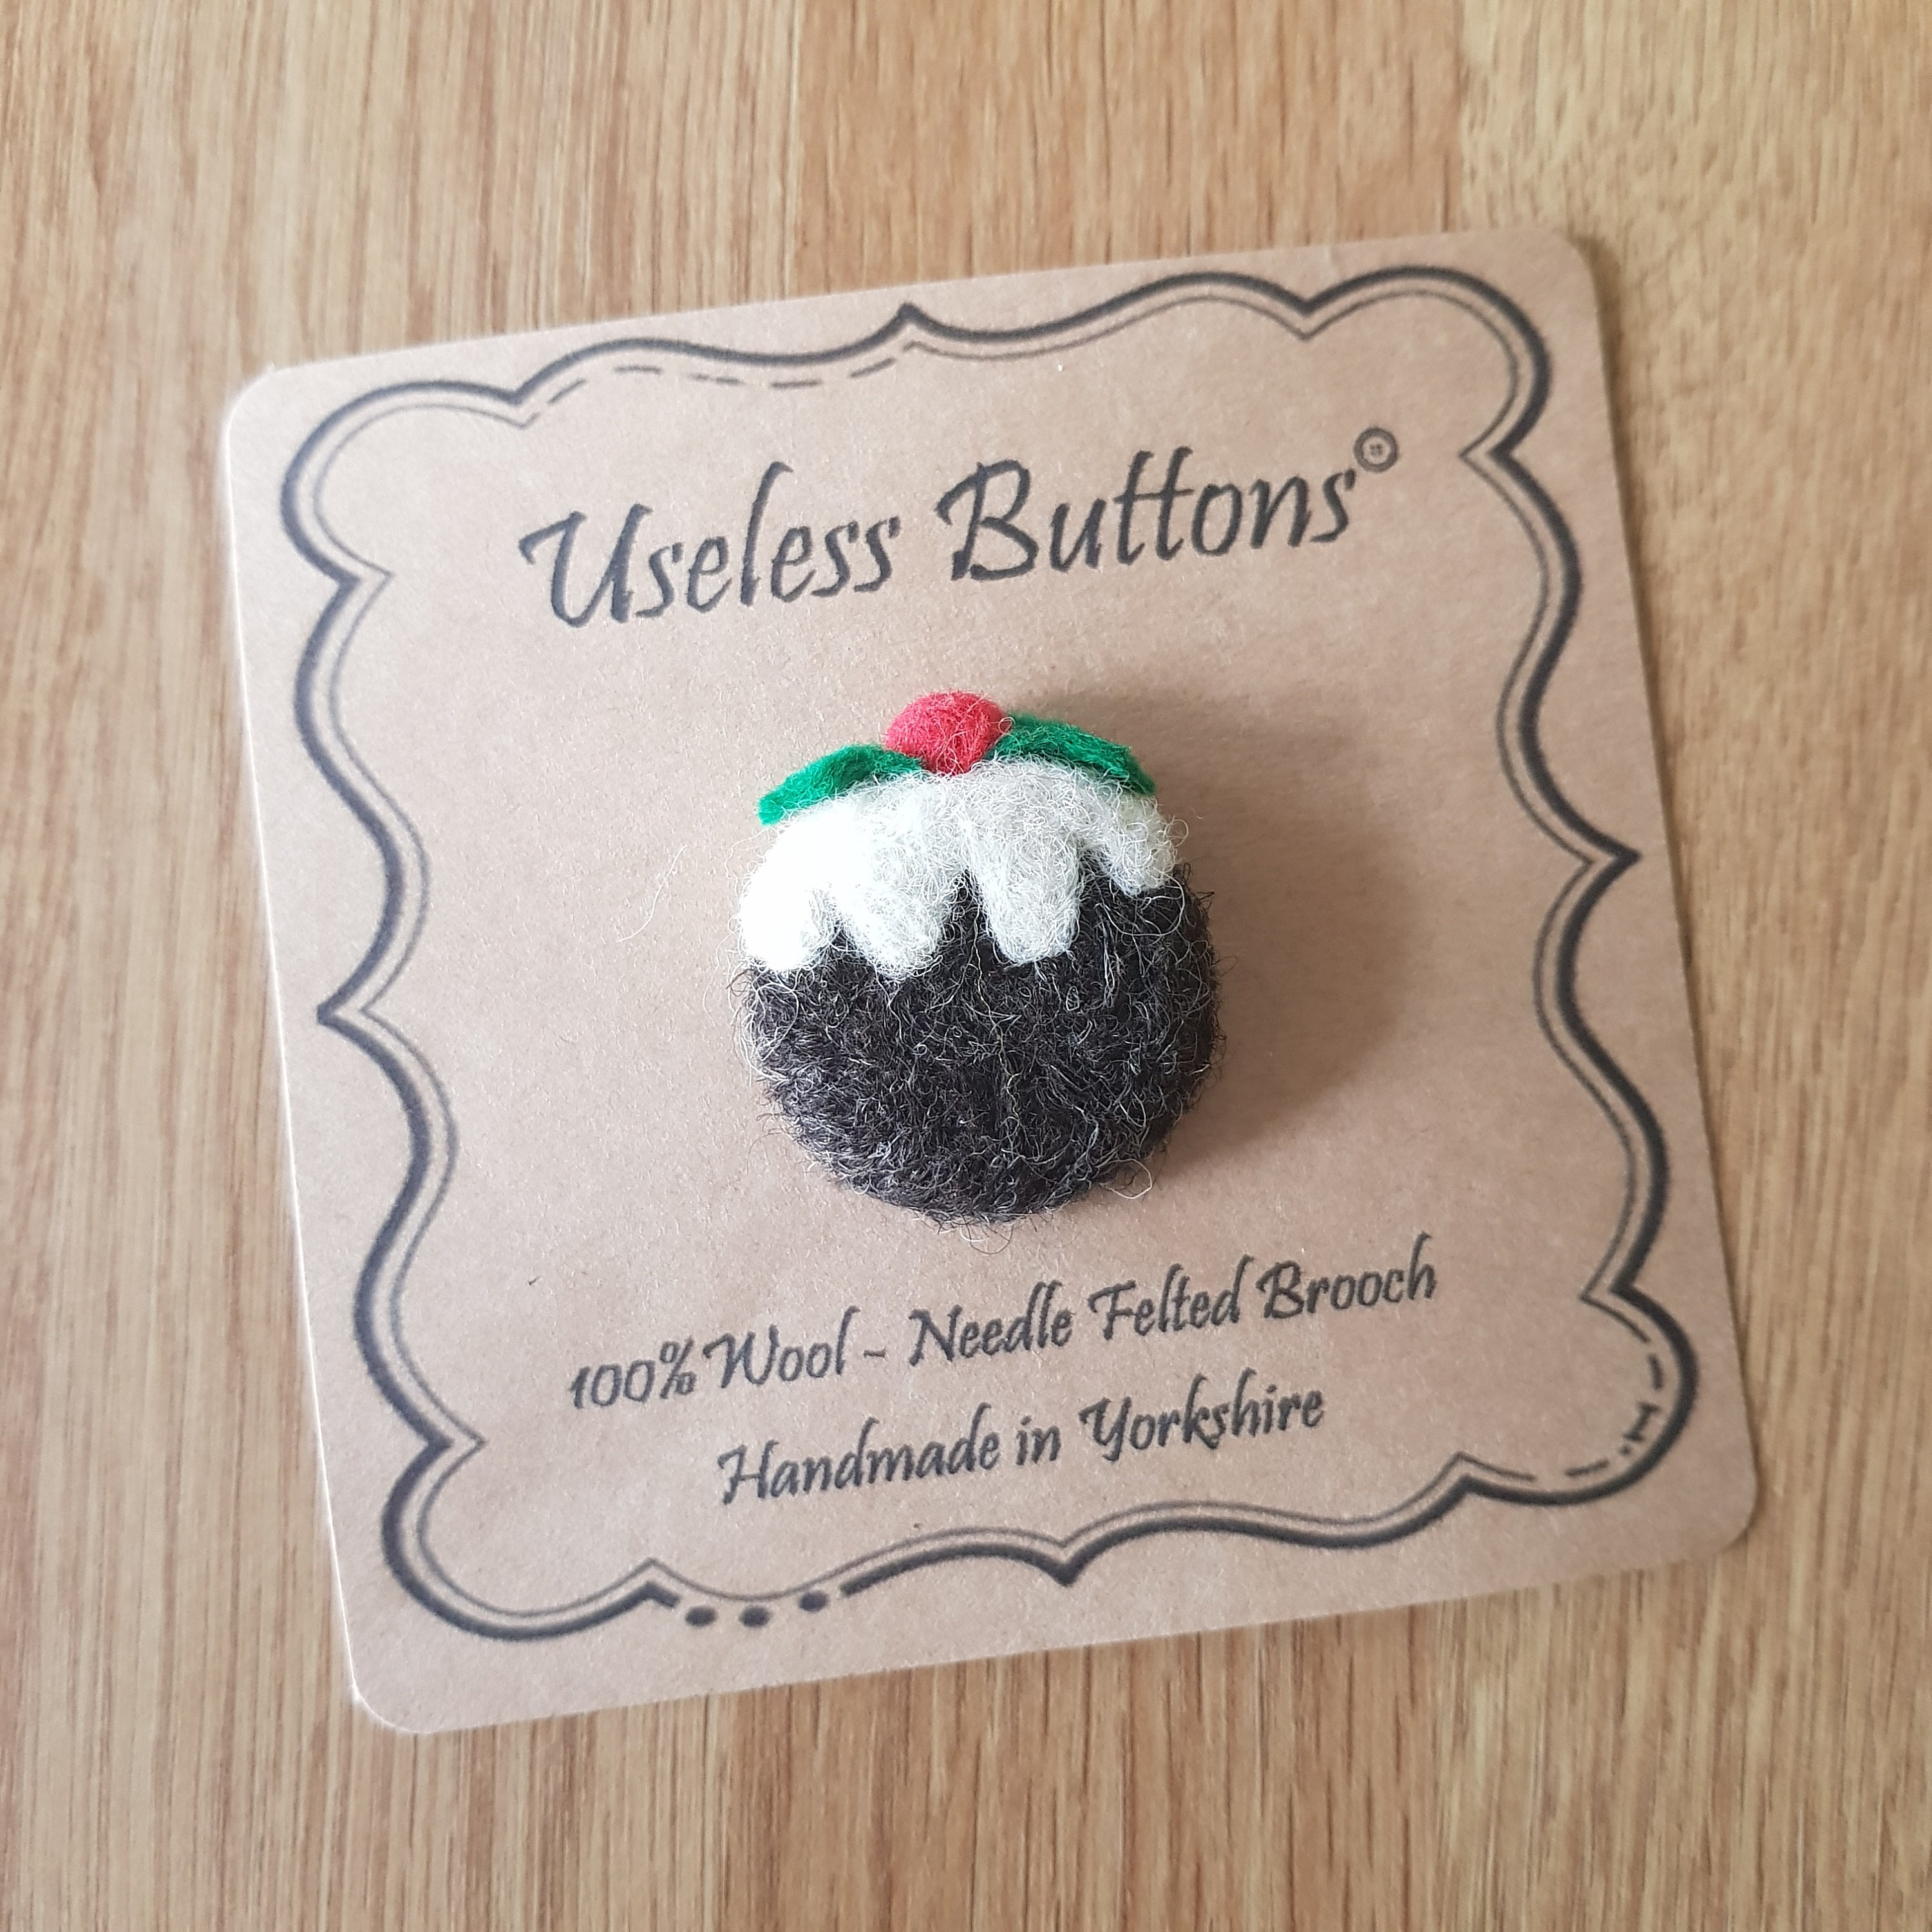 Christmas Pudding - Handmade Needle Felted Brooch. Perfect Gift For Birthday, Thank You, Teacher, Stocking Filler